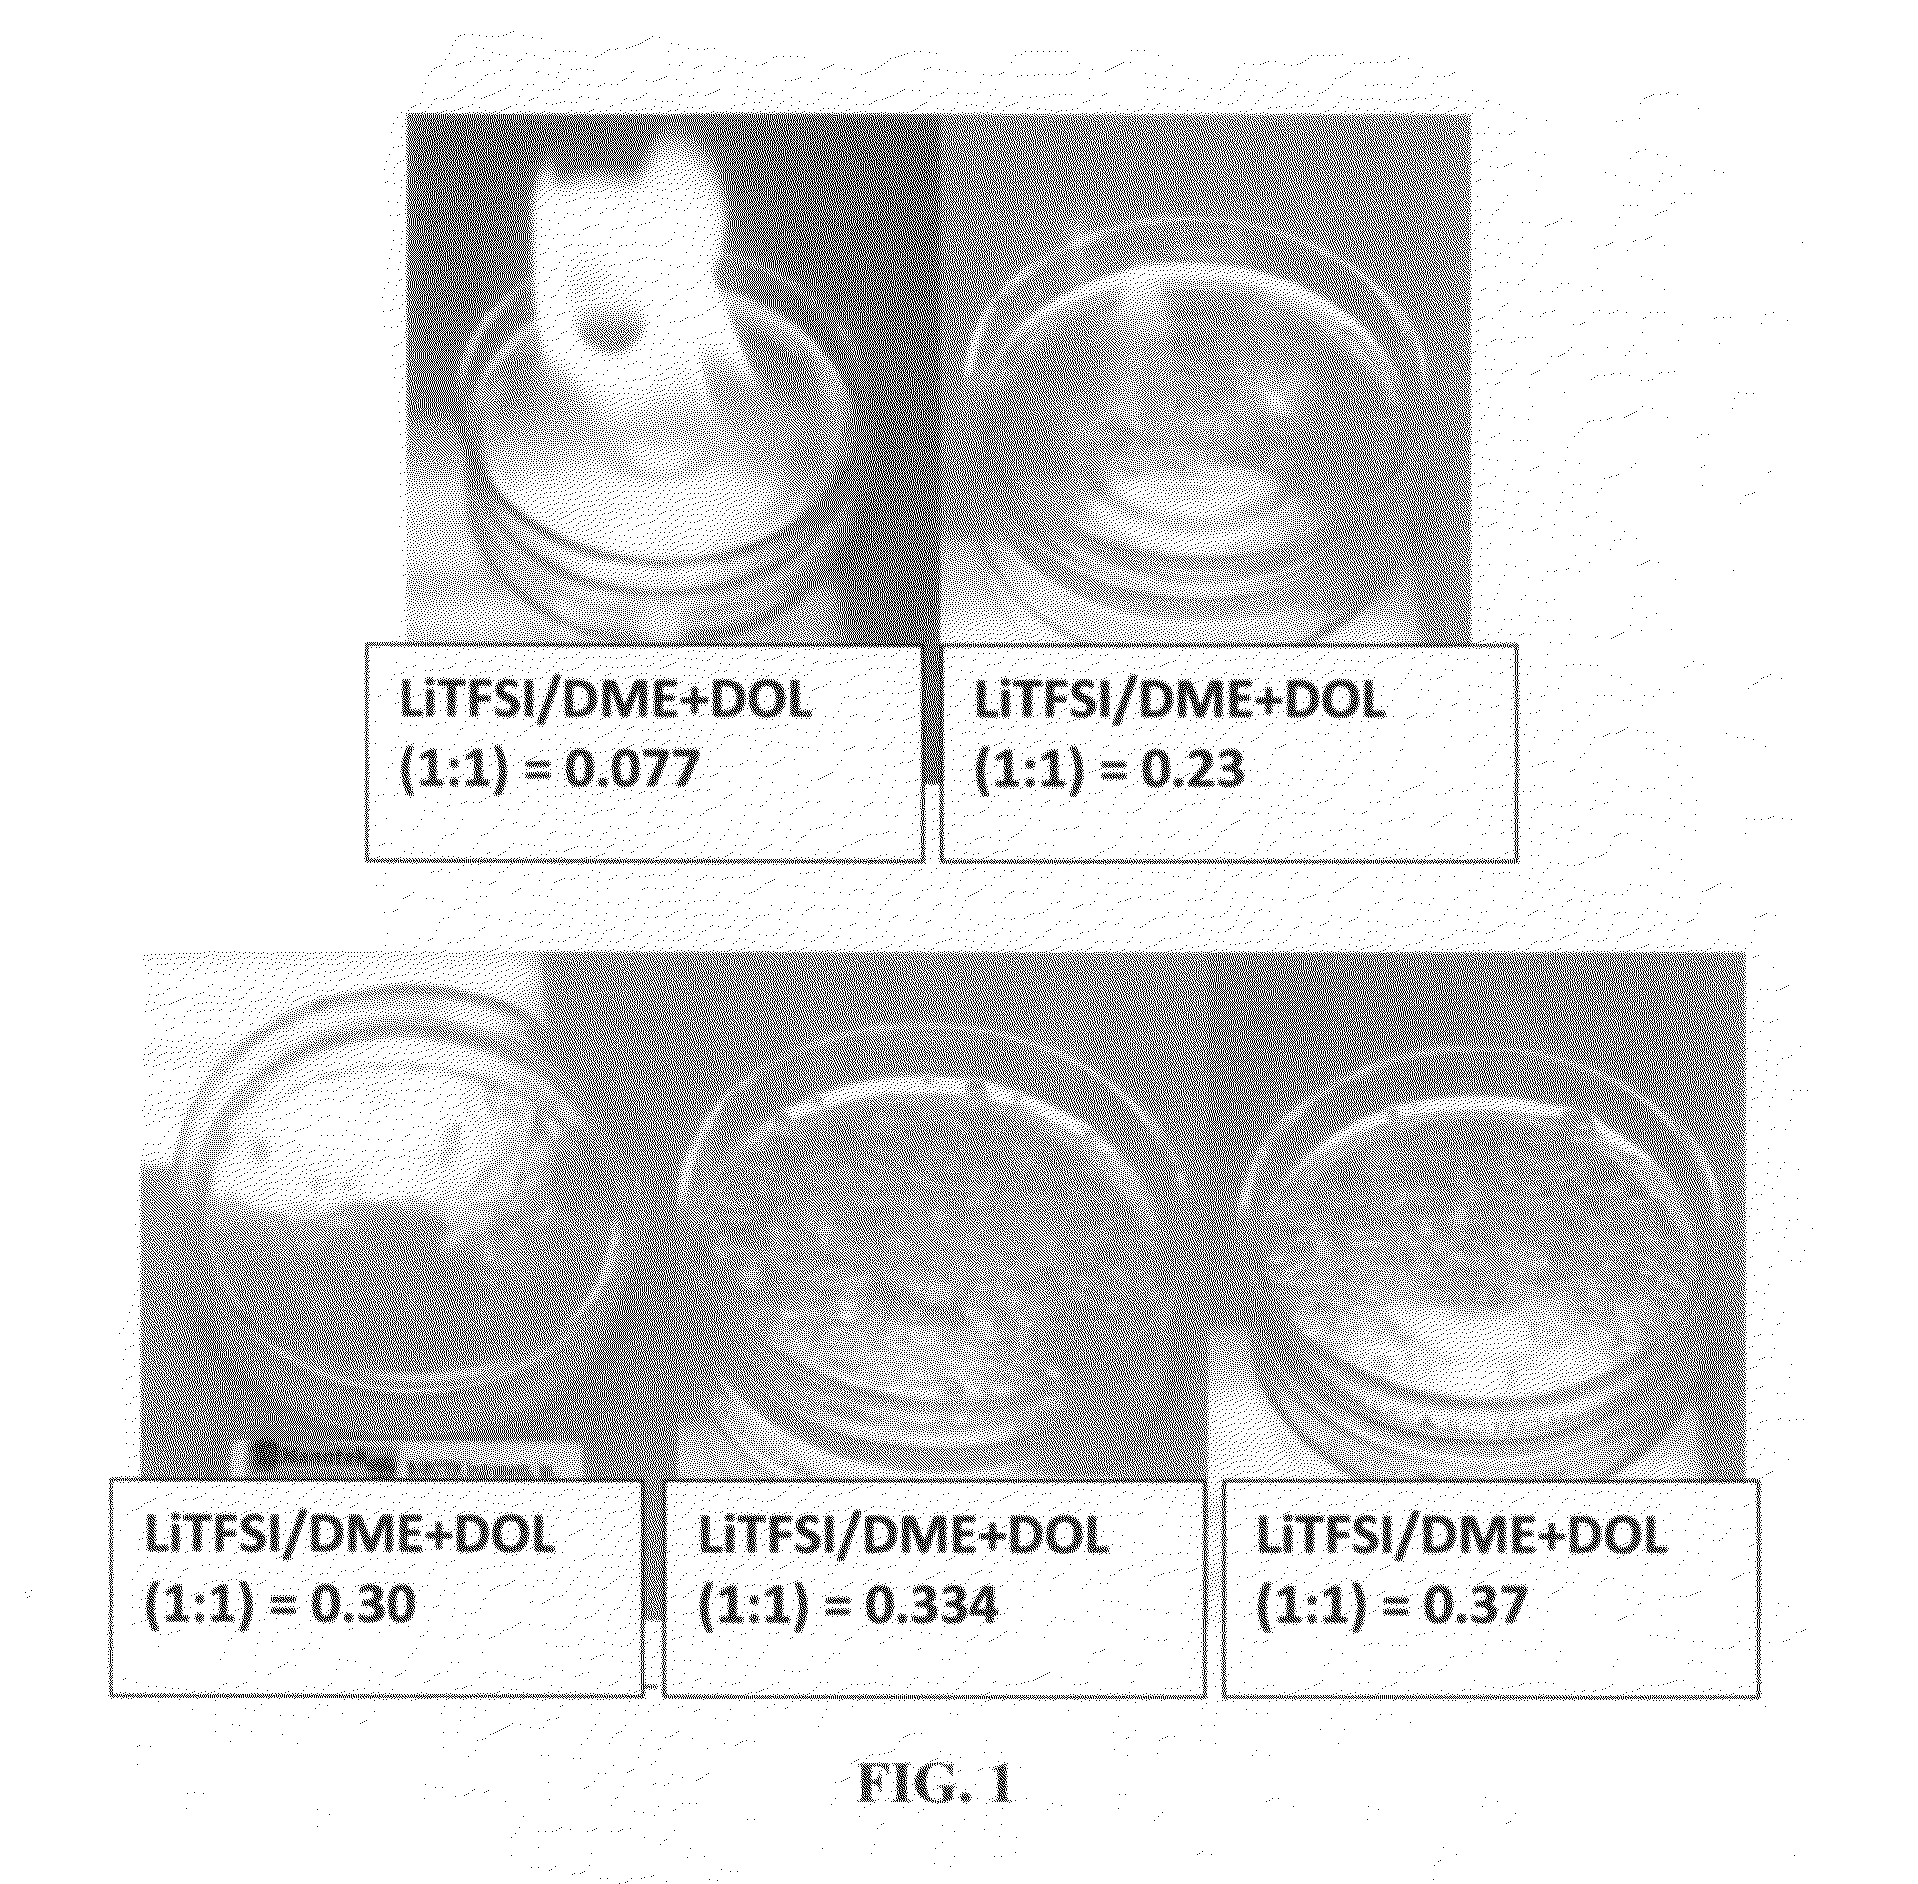 Process for producing non-flammable quasi-solid electrolyte and electrolyte-separator for lithium battery applications